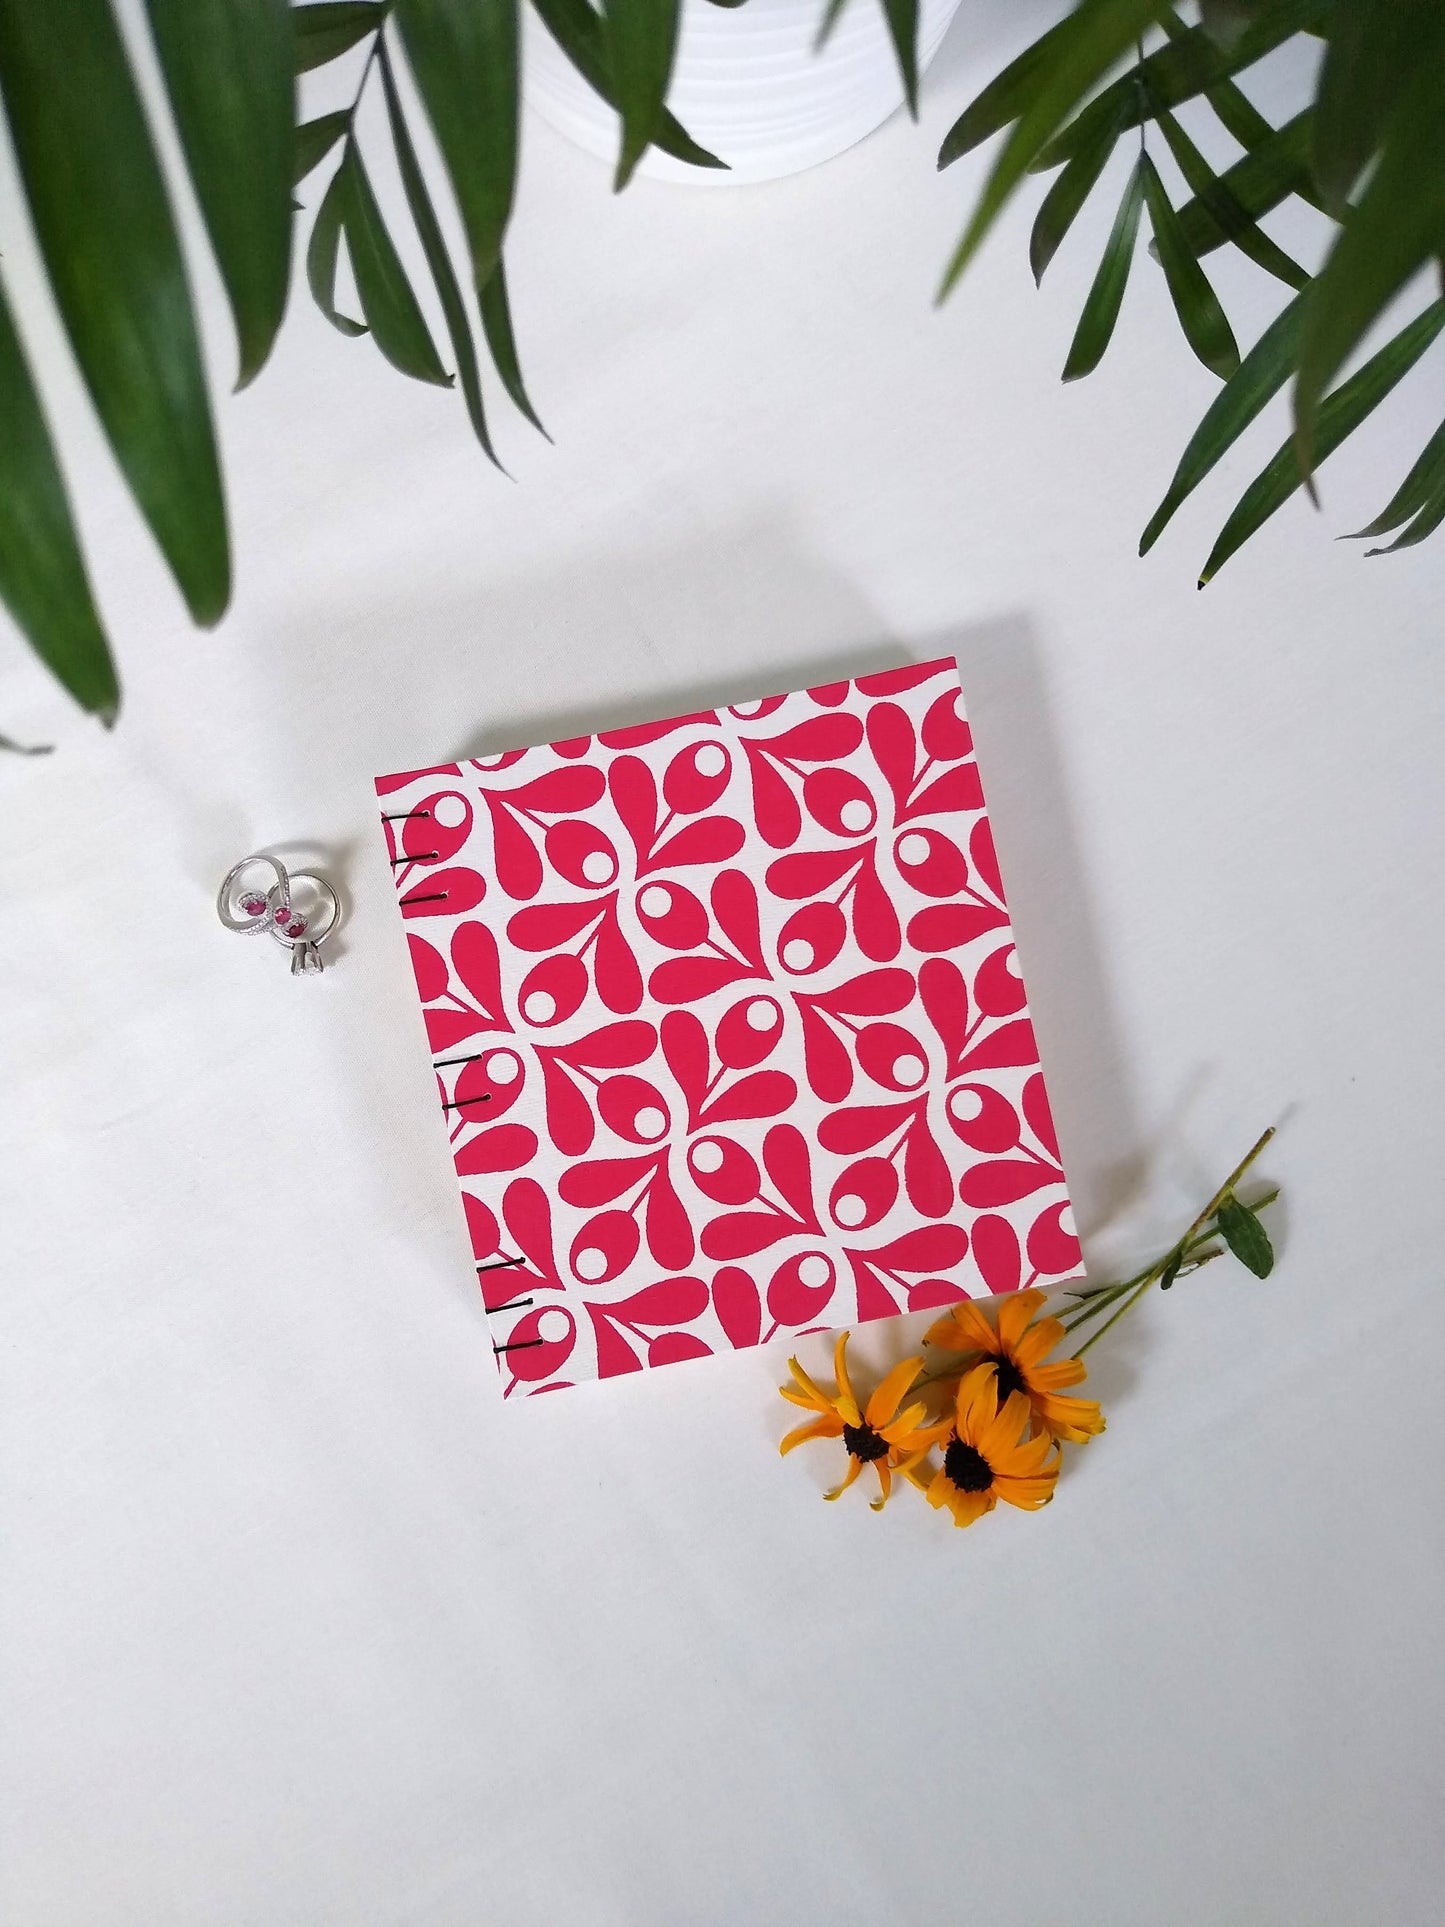 A handmade journal laying on a white desk beside a potted plant, two rings, and three yellow flowers. The cover of the journal is cream with red olive springs repeated across it.